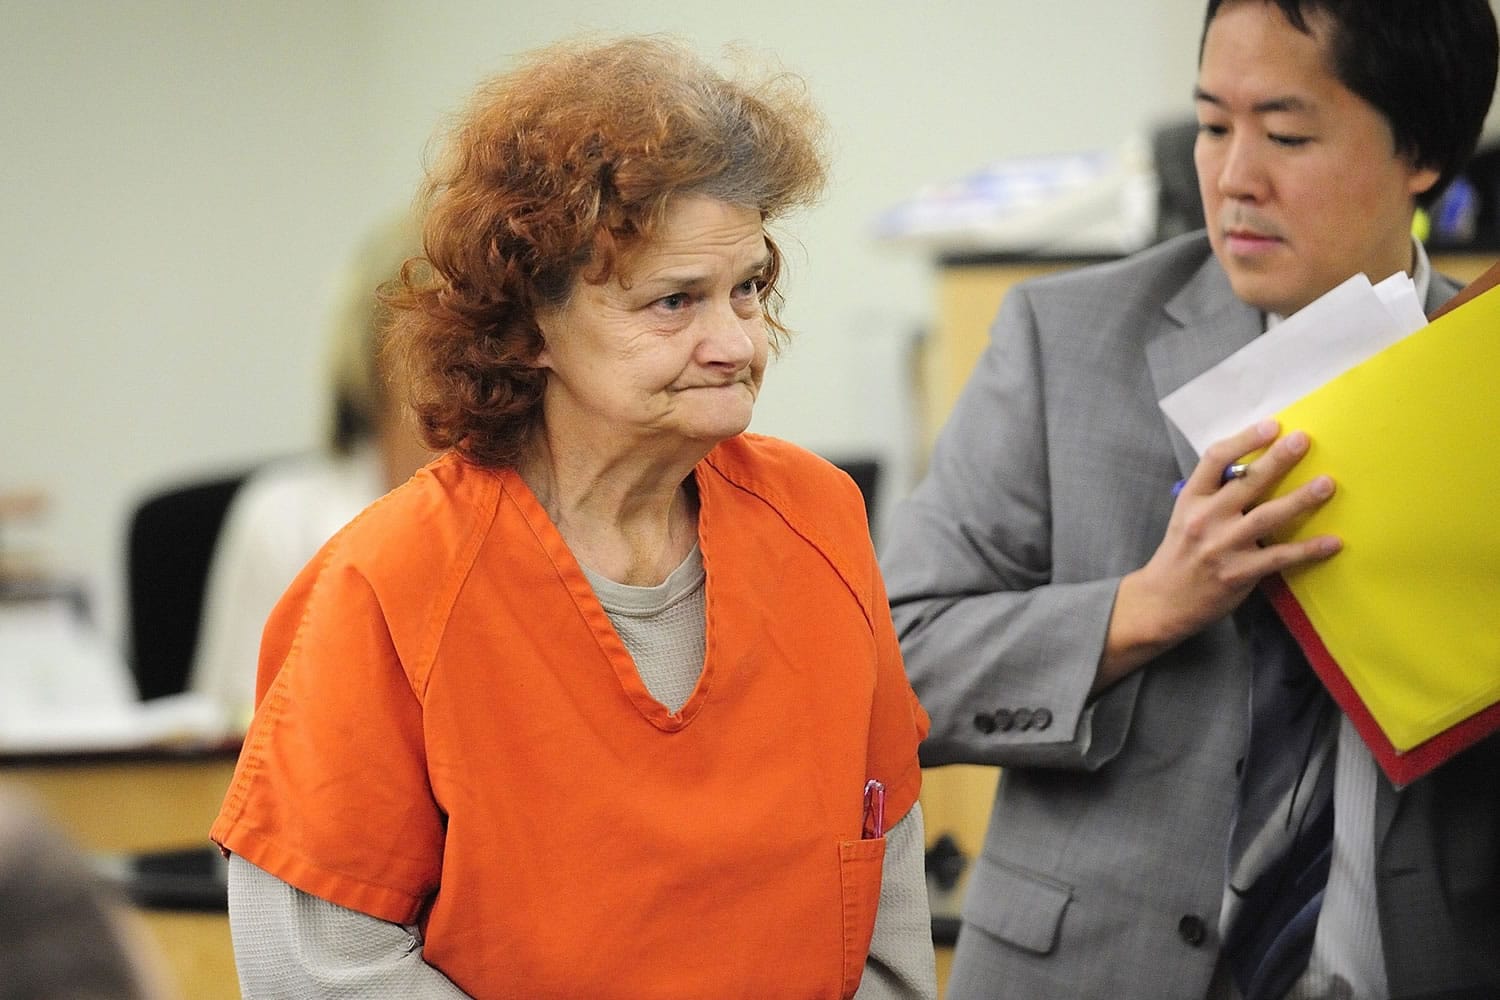 Karin Depee, an unlicensed caregiver, is charged with first-degree manslaughter and first-degree criminal mistreatment in the death of Rachelle Law.